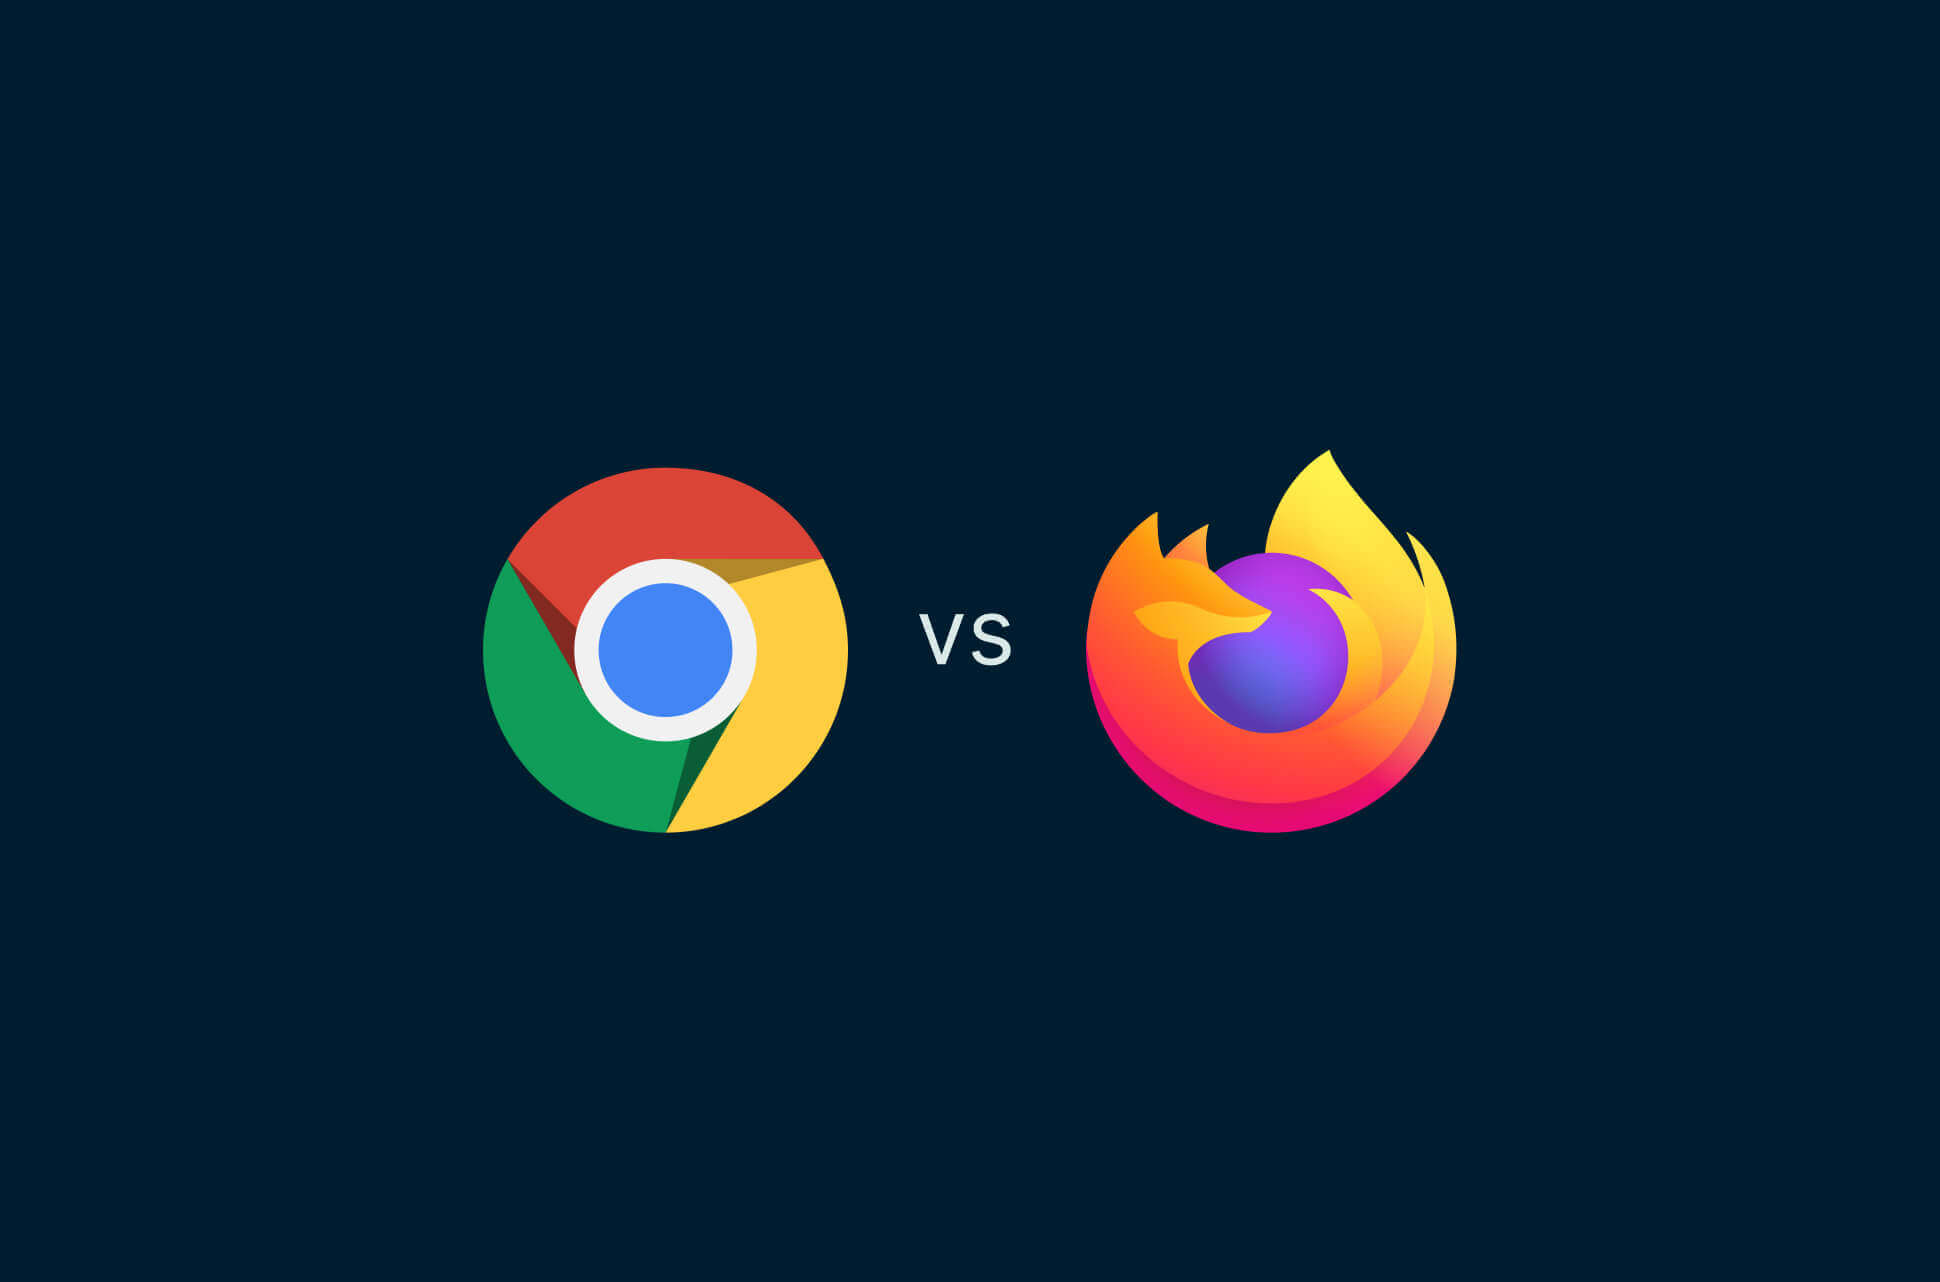 Is Google or Firefox faster?